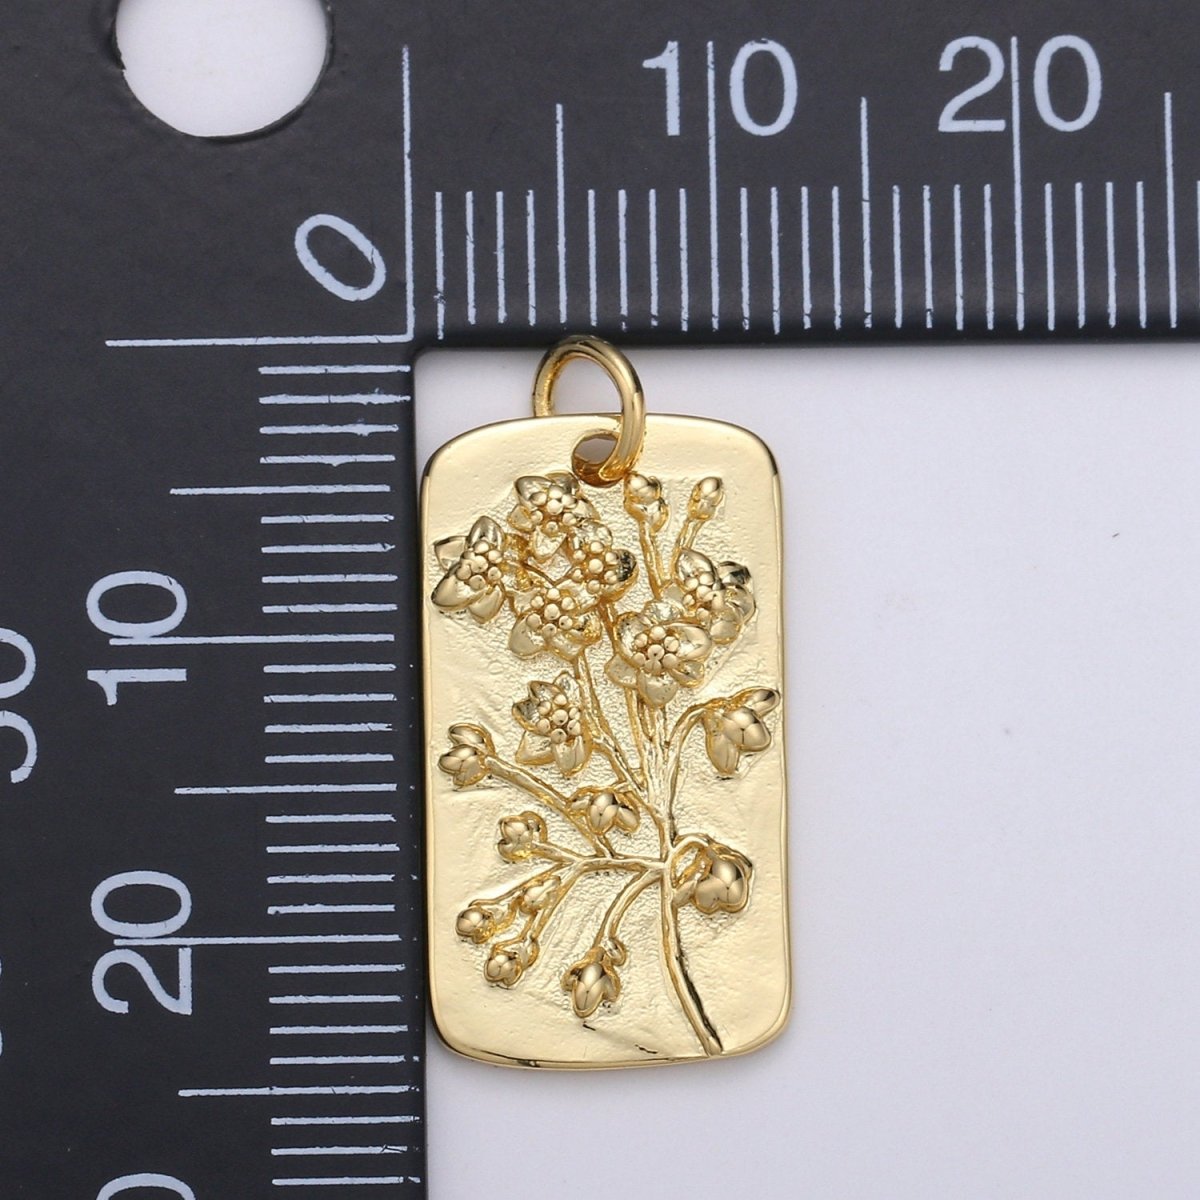 Cotton Blossom Flower Charms, Gold Tag Pendant, Dainty Cotton Charm, Small Wild Flower Charm for Necklace Floral Flower Tag Jewelry D-769 - DLUXCA